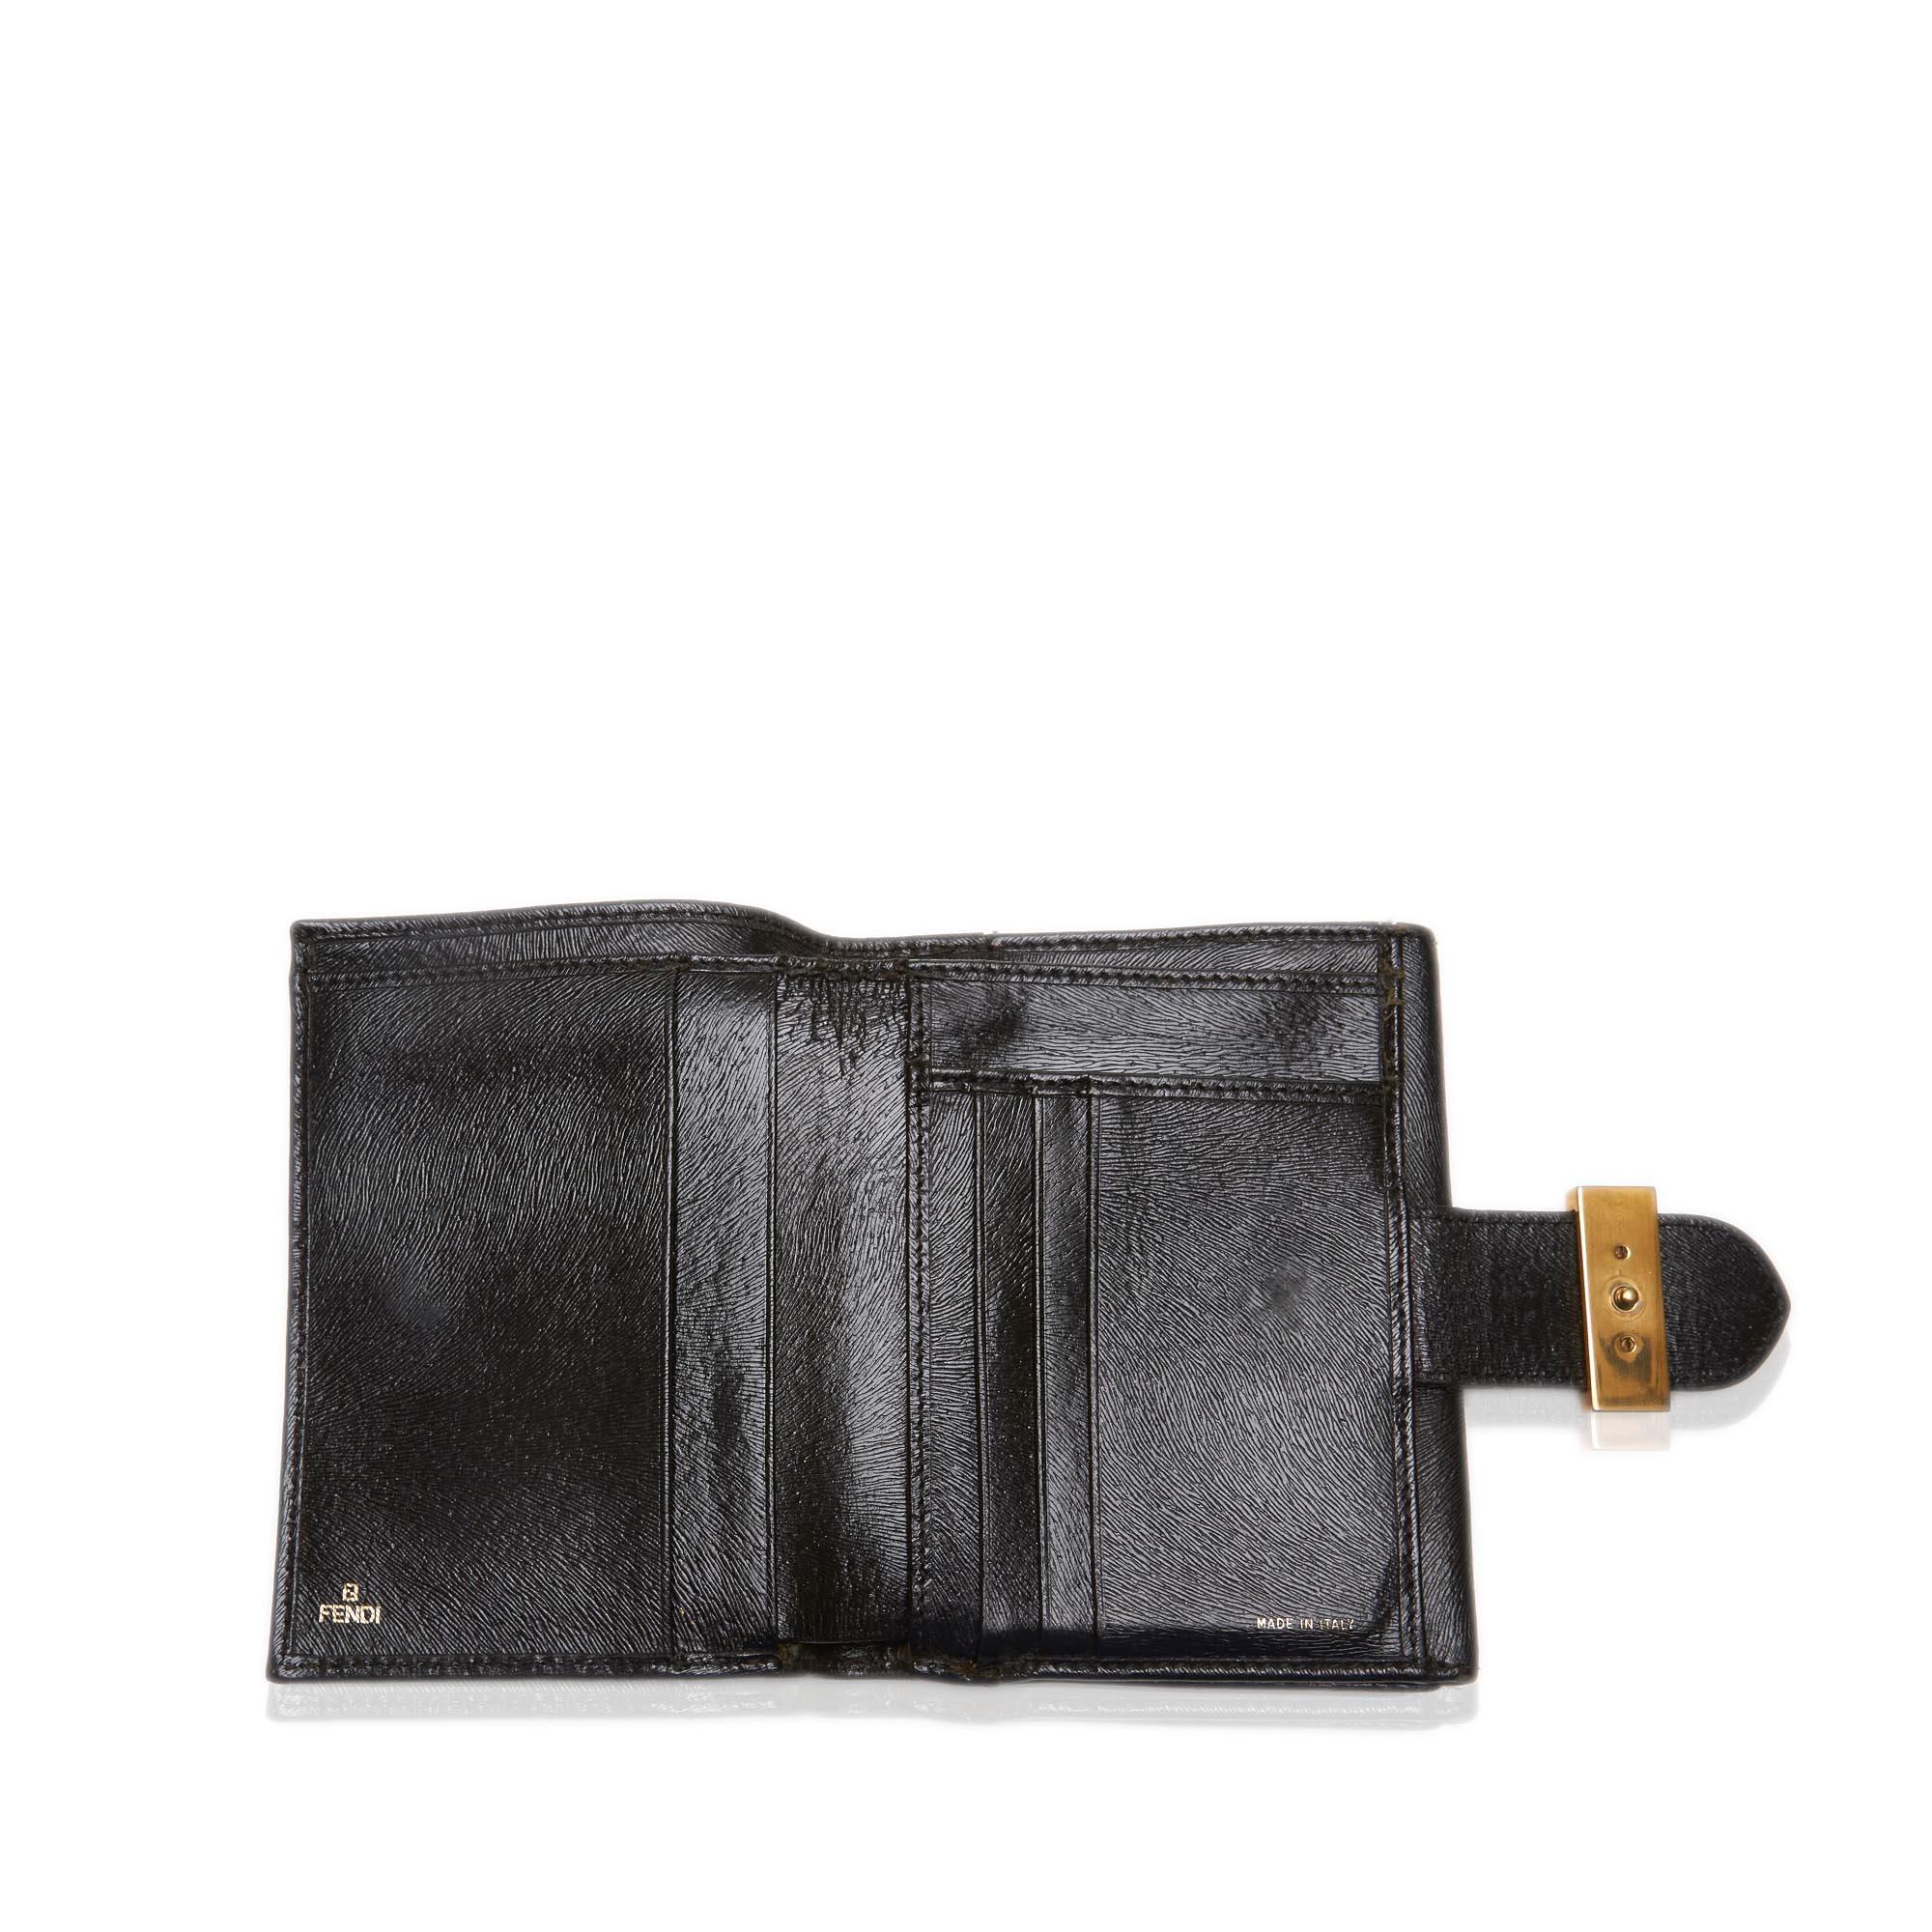 Fendi Black Others Leather Embossed Short Wallet Italy 4